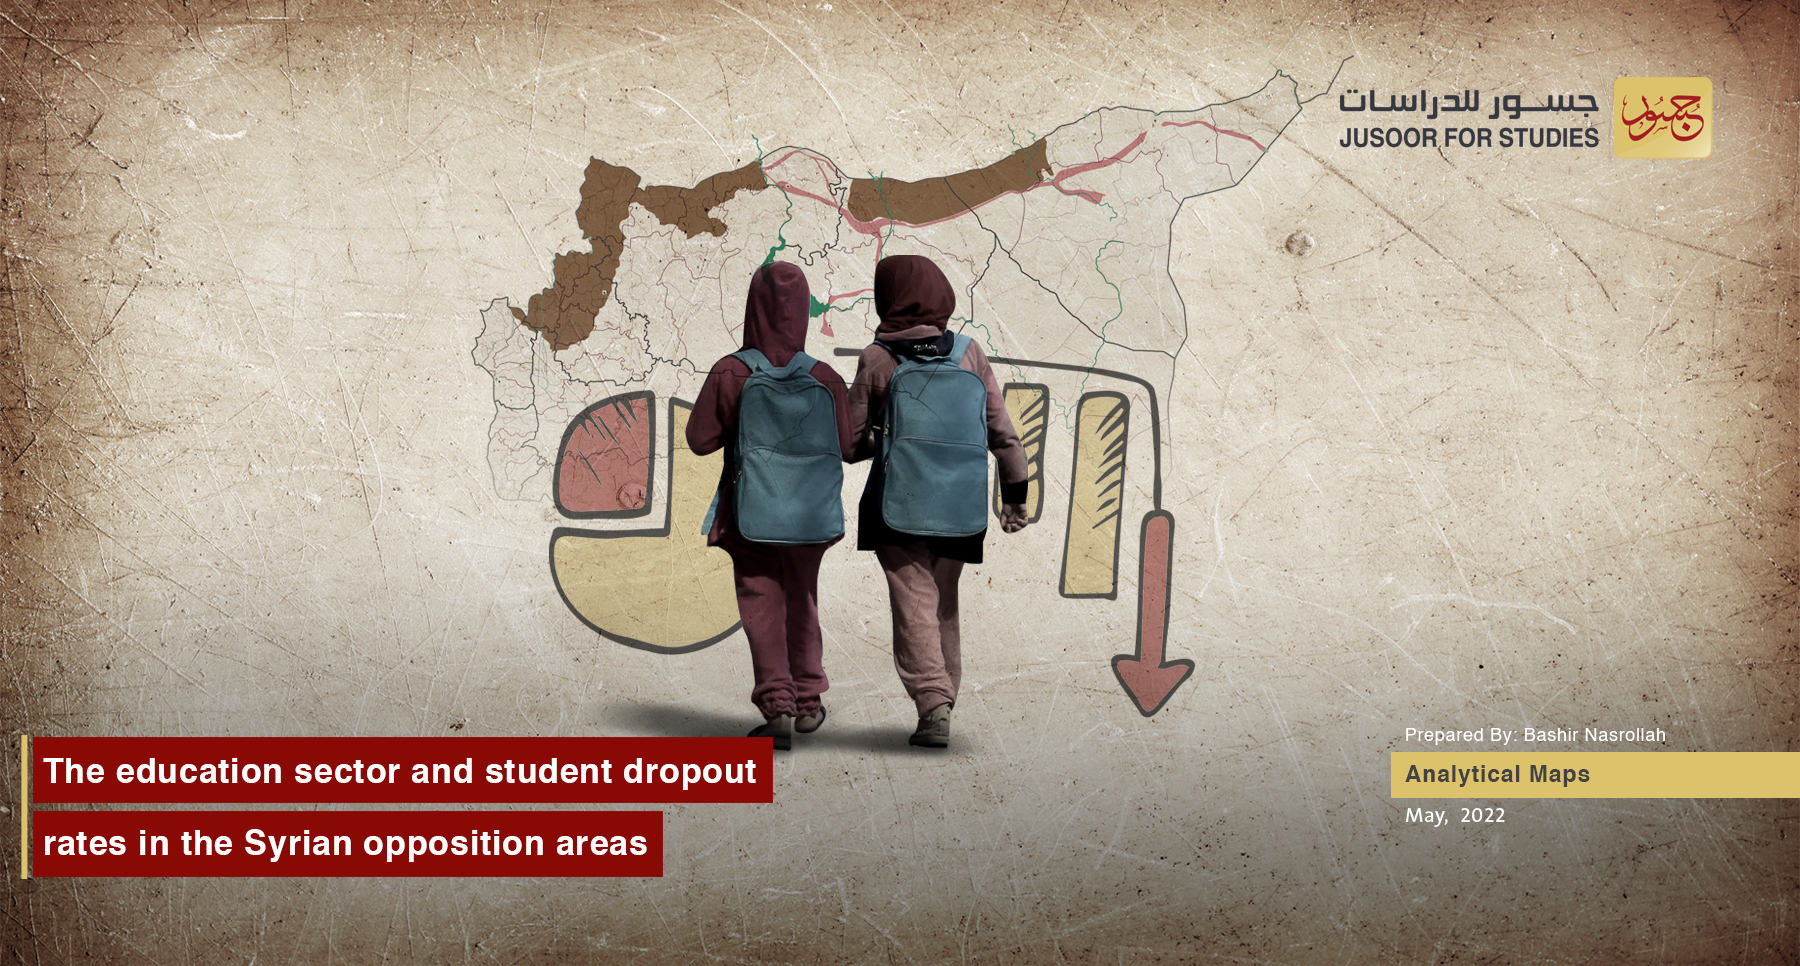 Statistics: The education sector and student dropout rates in the Syrian opposition areas 